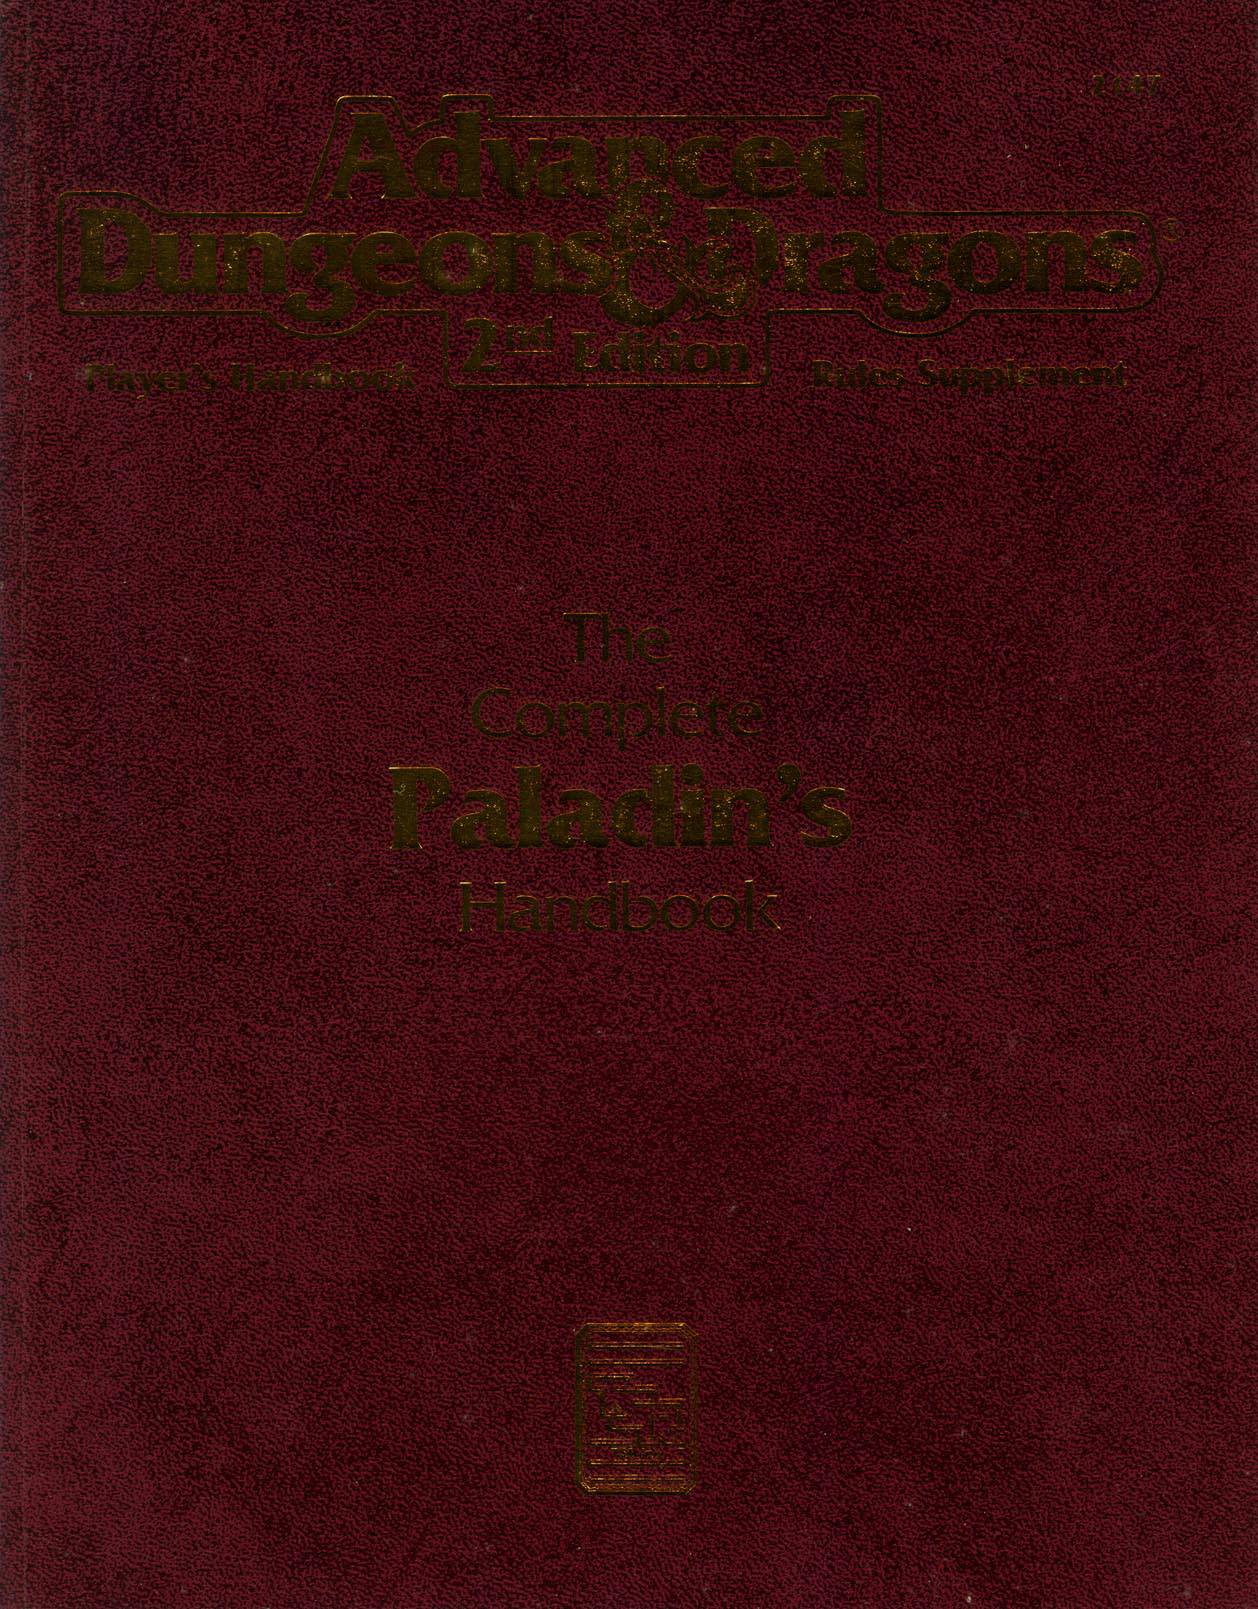 DUNGEONS & DRAGONS - THE COMPLETE PALADINS HANDBOOK 2147 2ND EDITION PHBR12 - RPG RELIQUARY